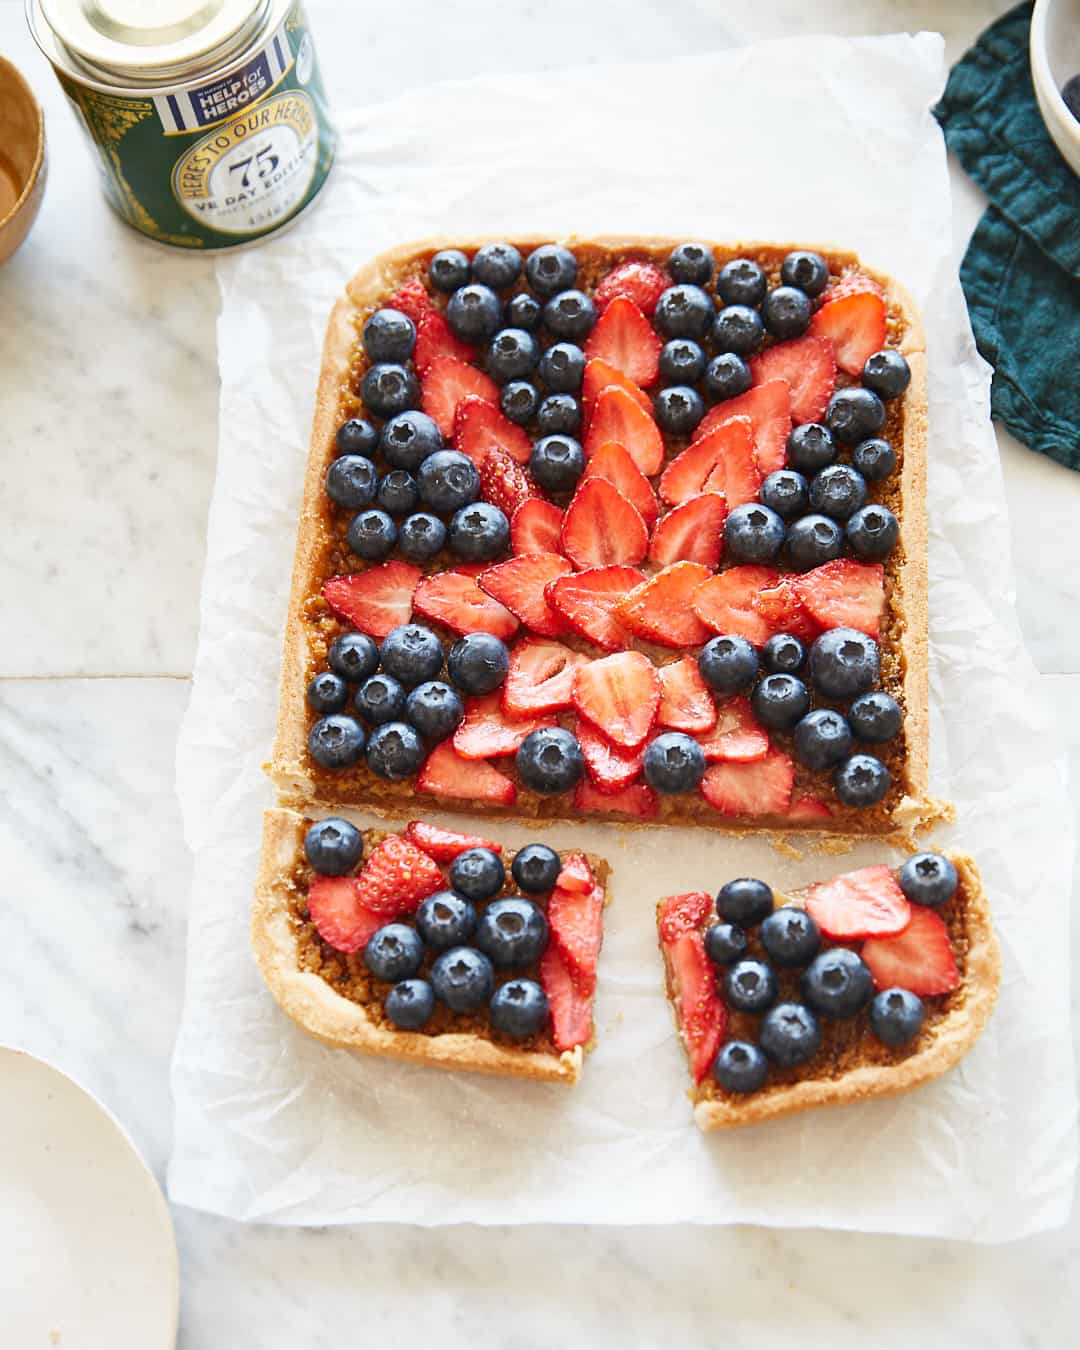 a treacle tart topped with berries in the shape of the union jack